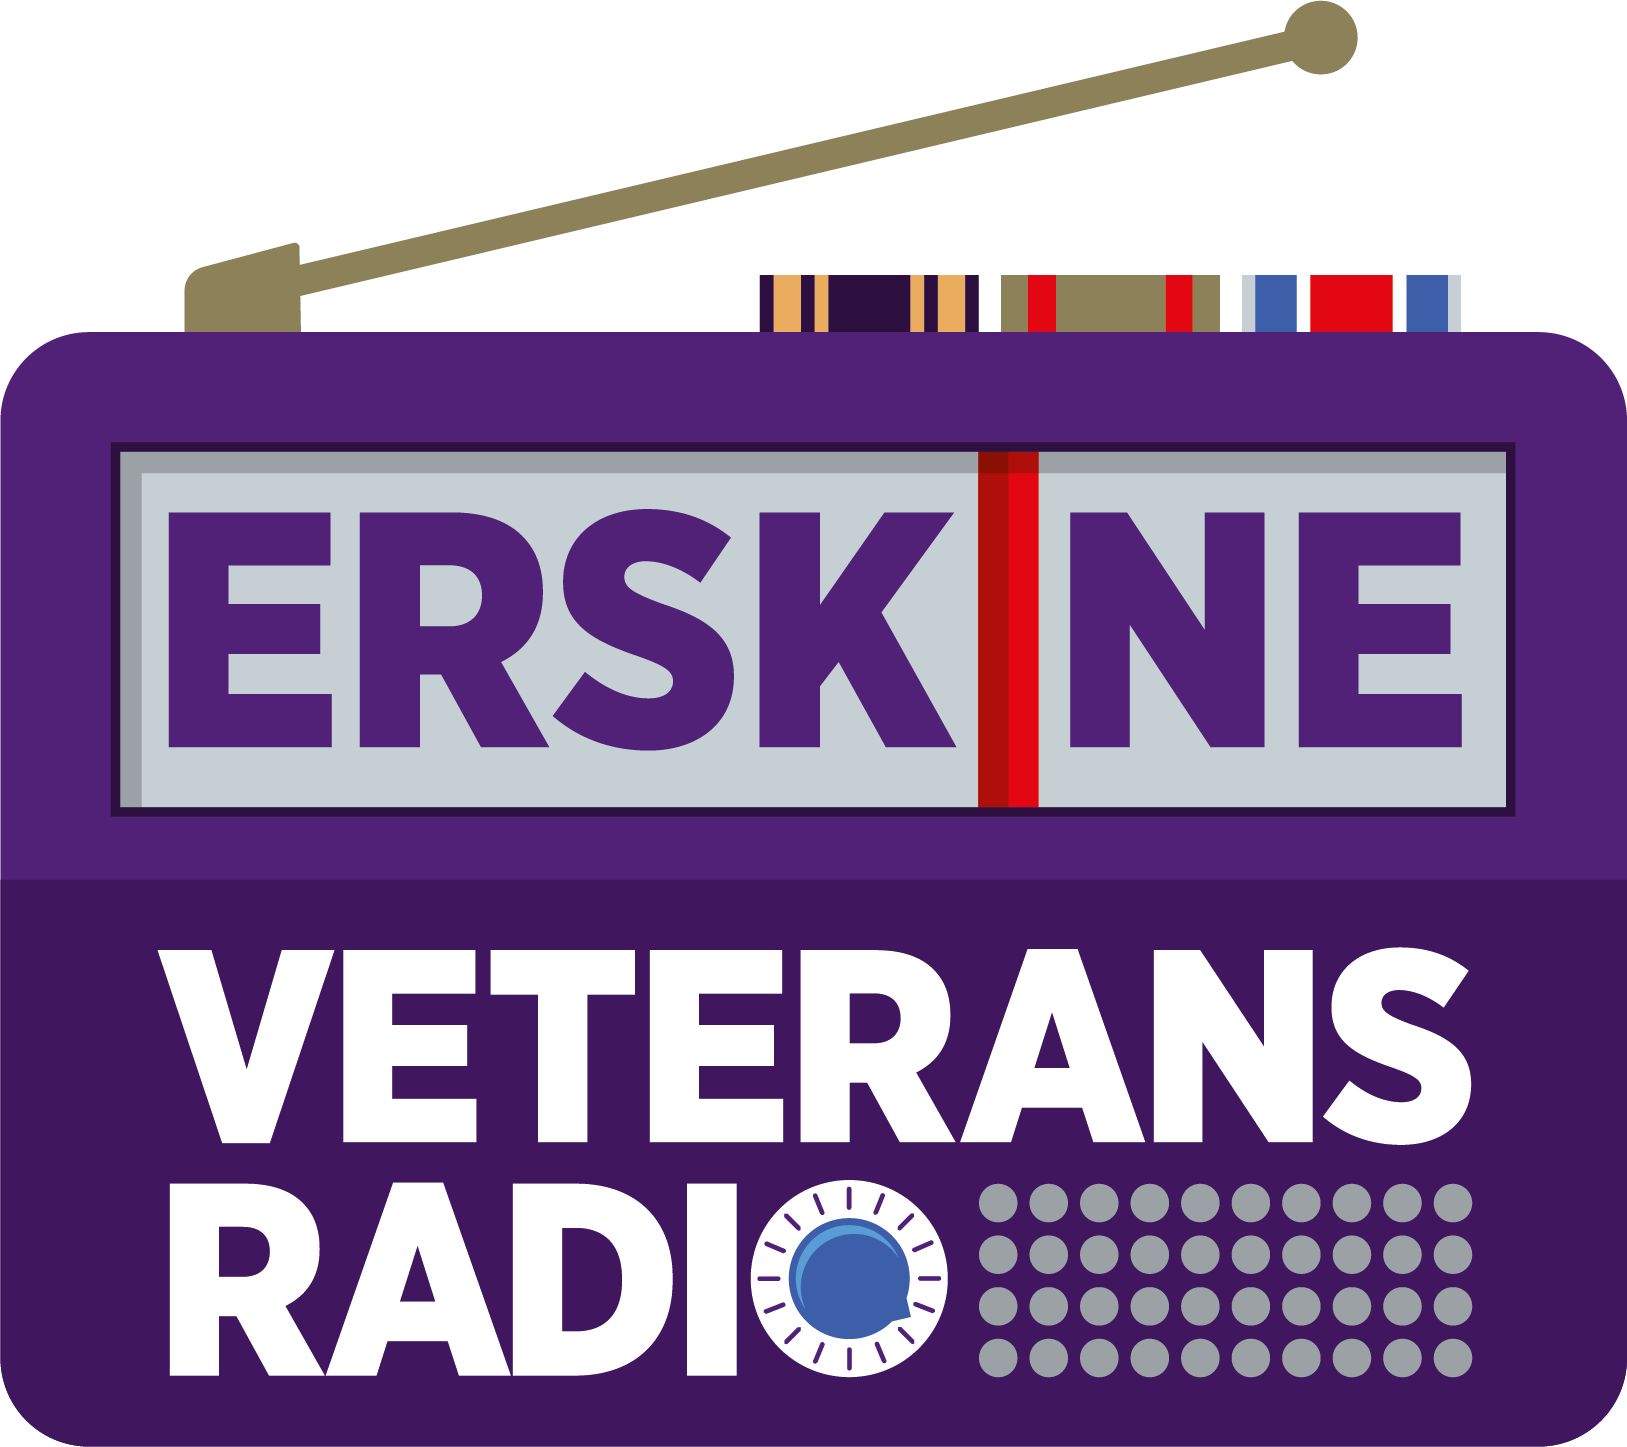 National Clinical Director Jason Leitch to appear on Erskine Veterans Radio